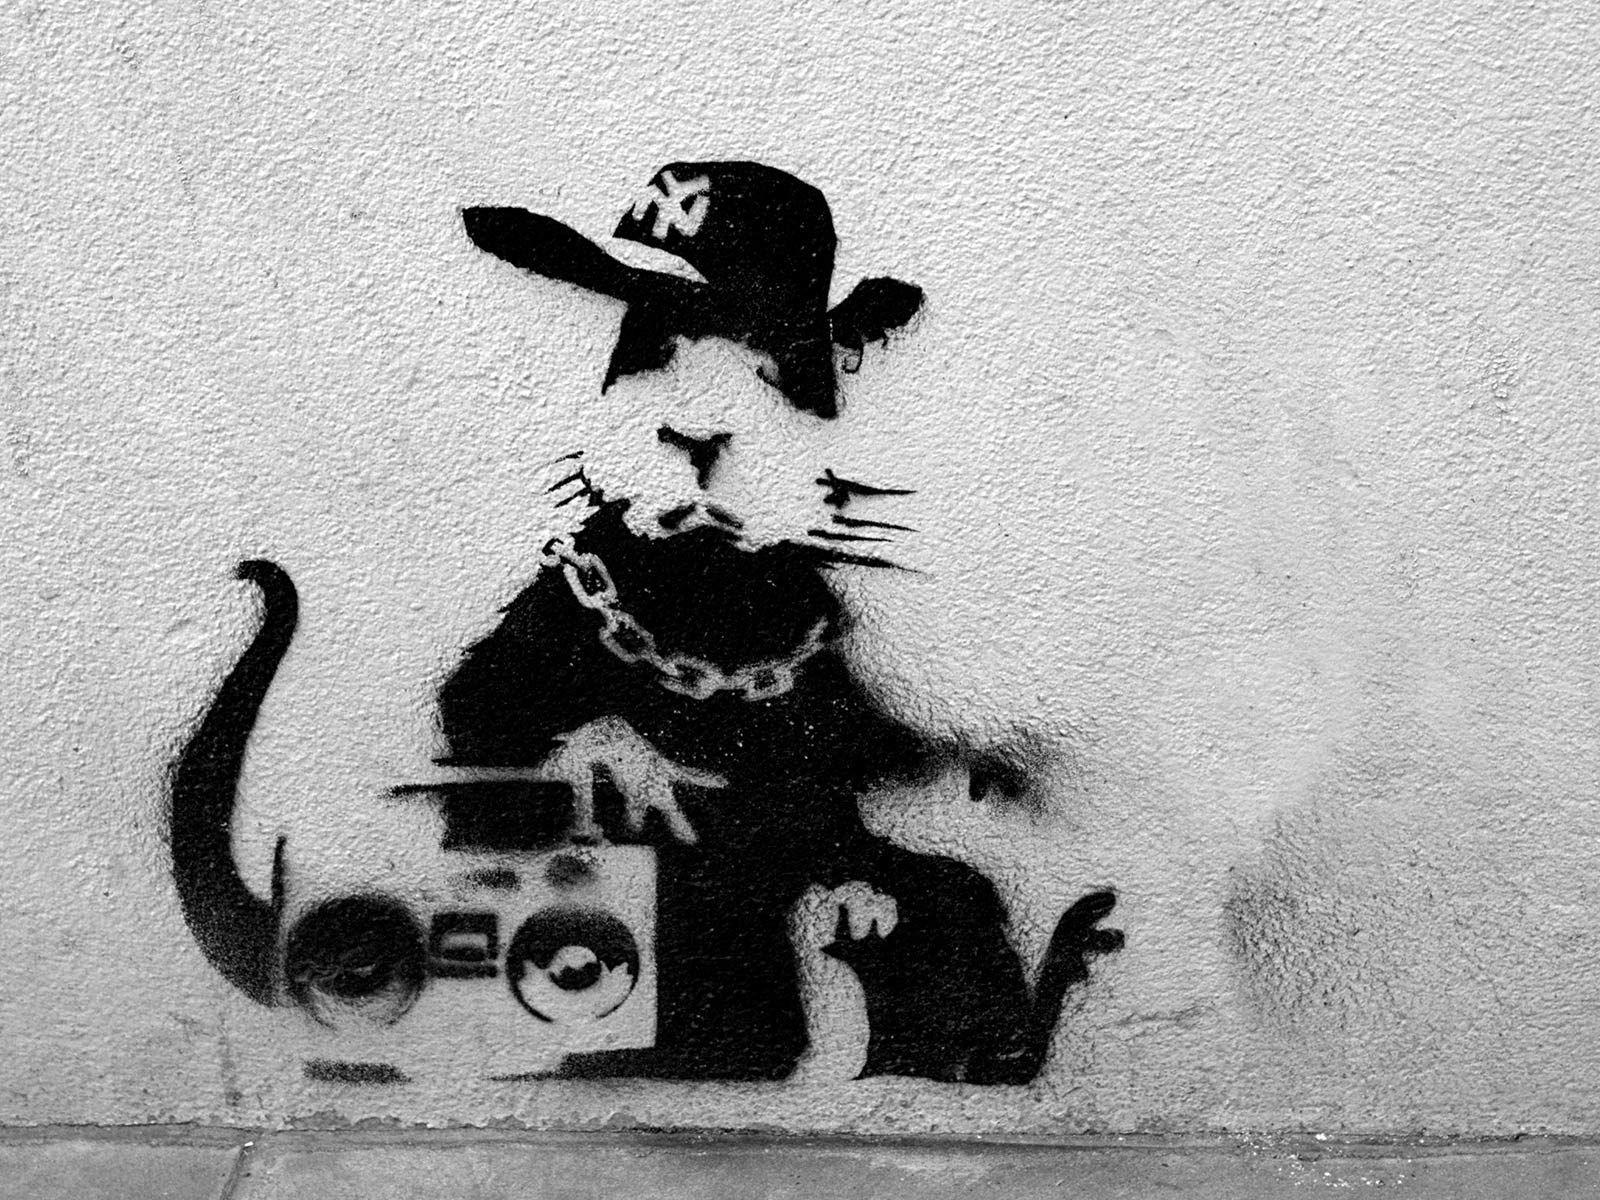 Of course it possible that Banksy never meant for the rat to